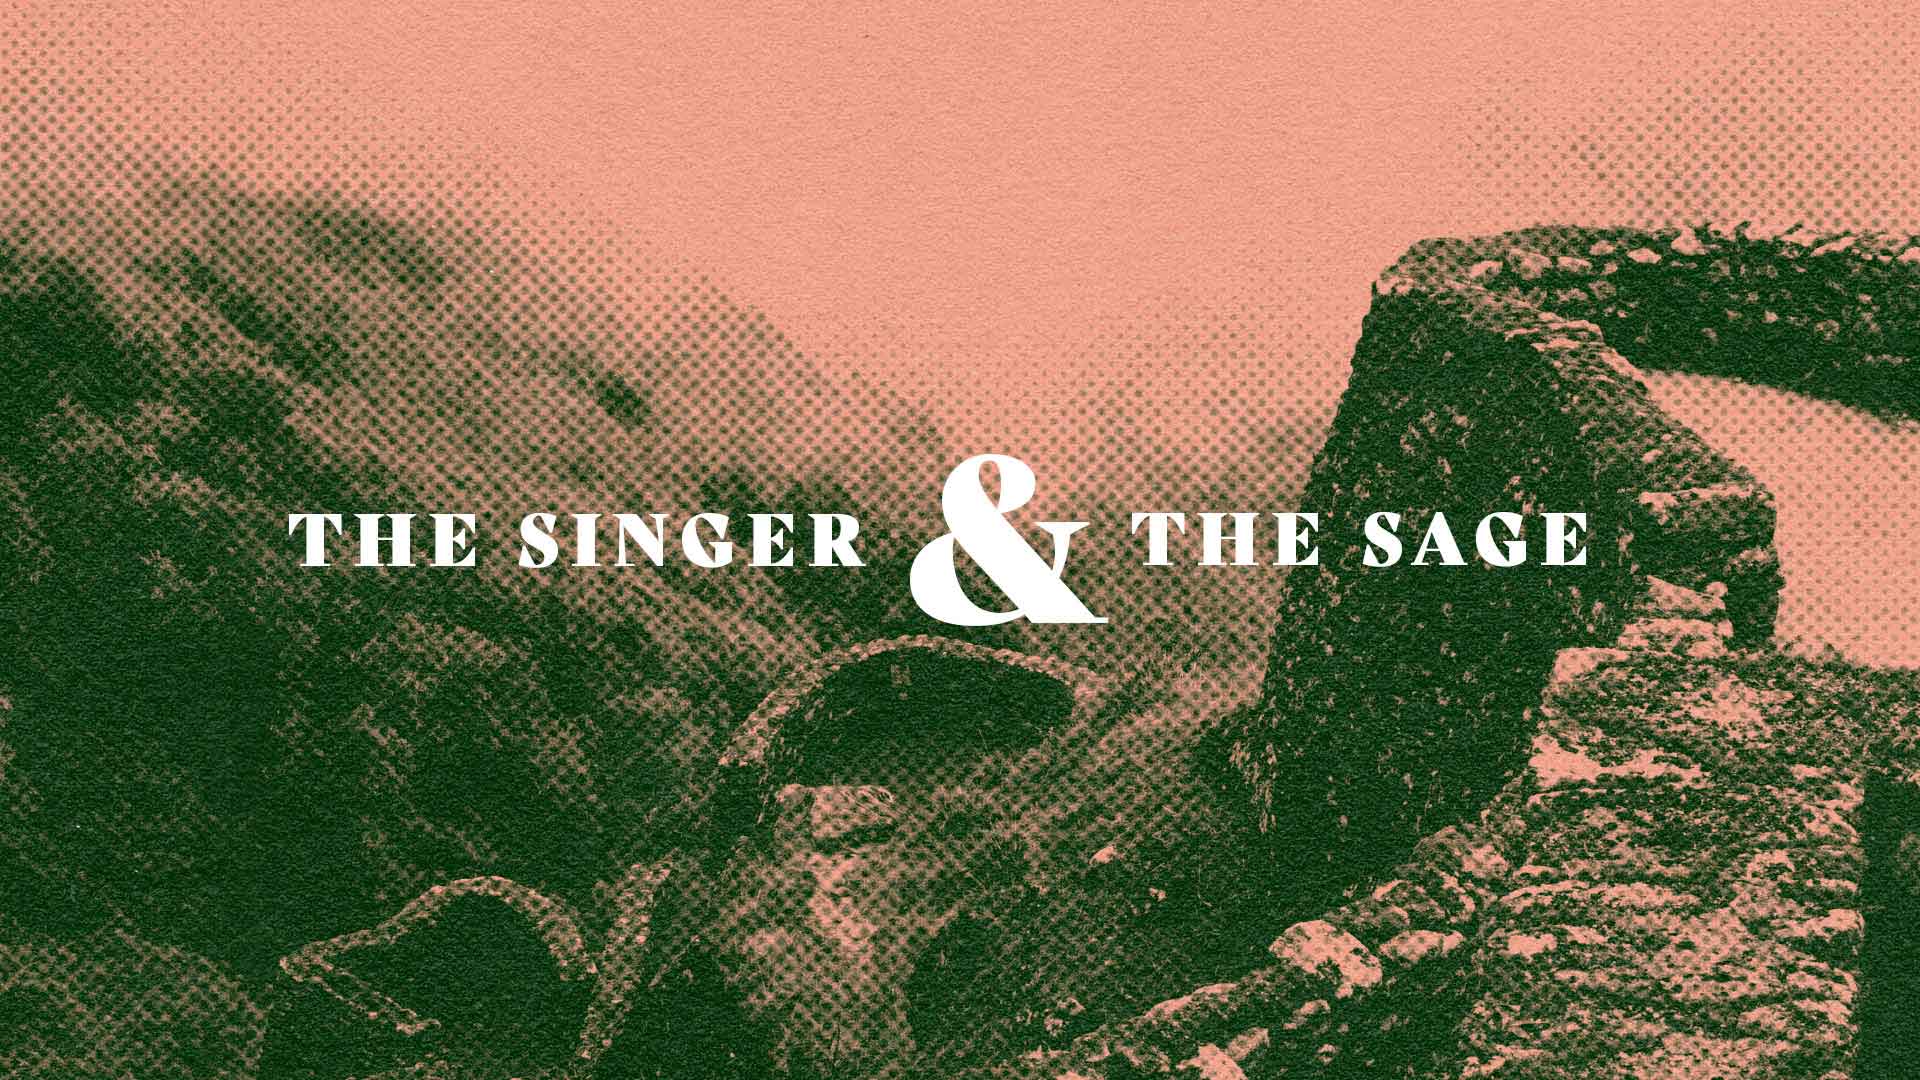 Series: The Singer & The Sage